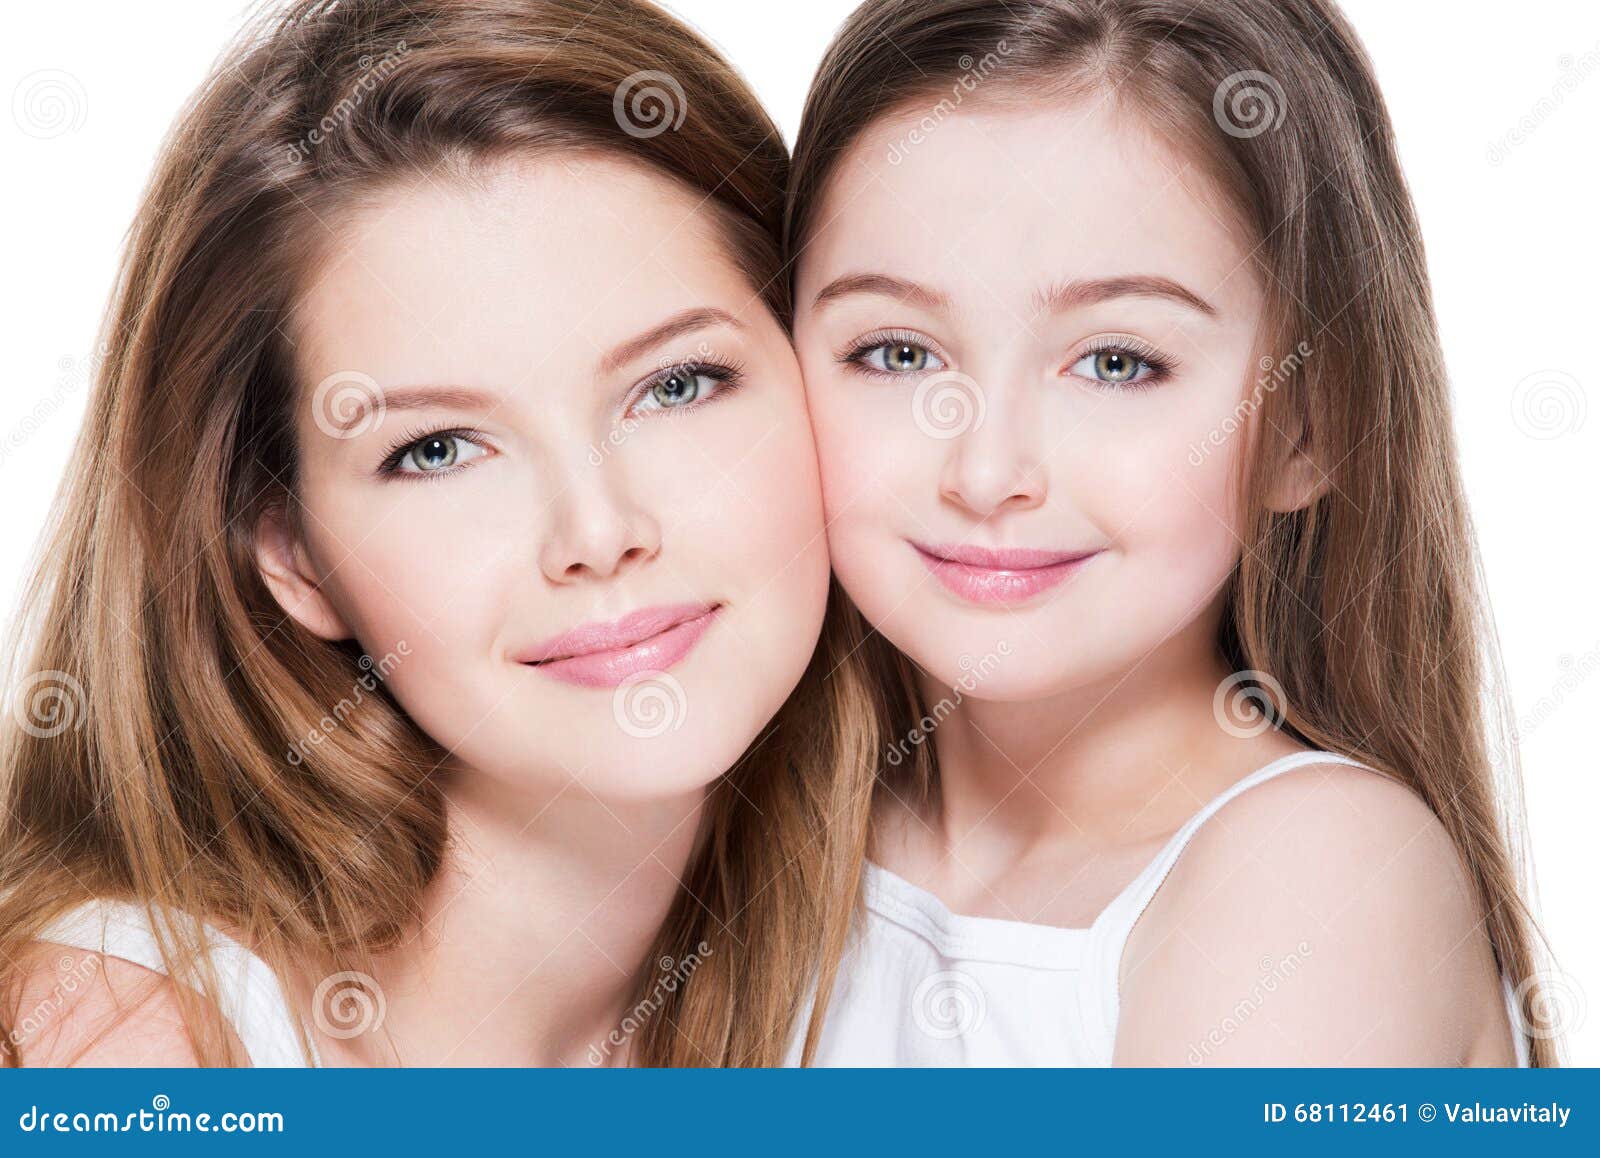 Happy Young Mother With A Small Daughter 8 Years Stock Image Image Of Cute Happy 68112461 